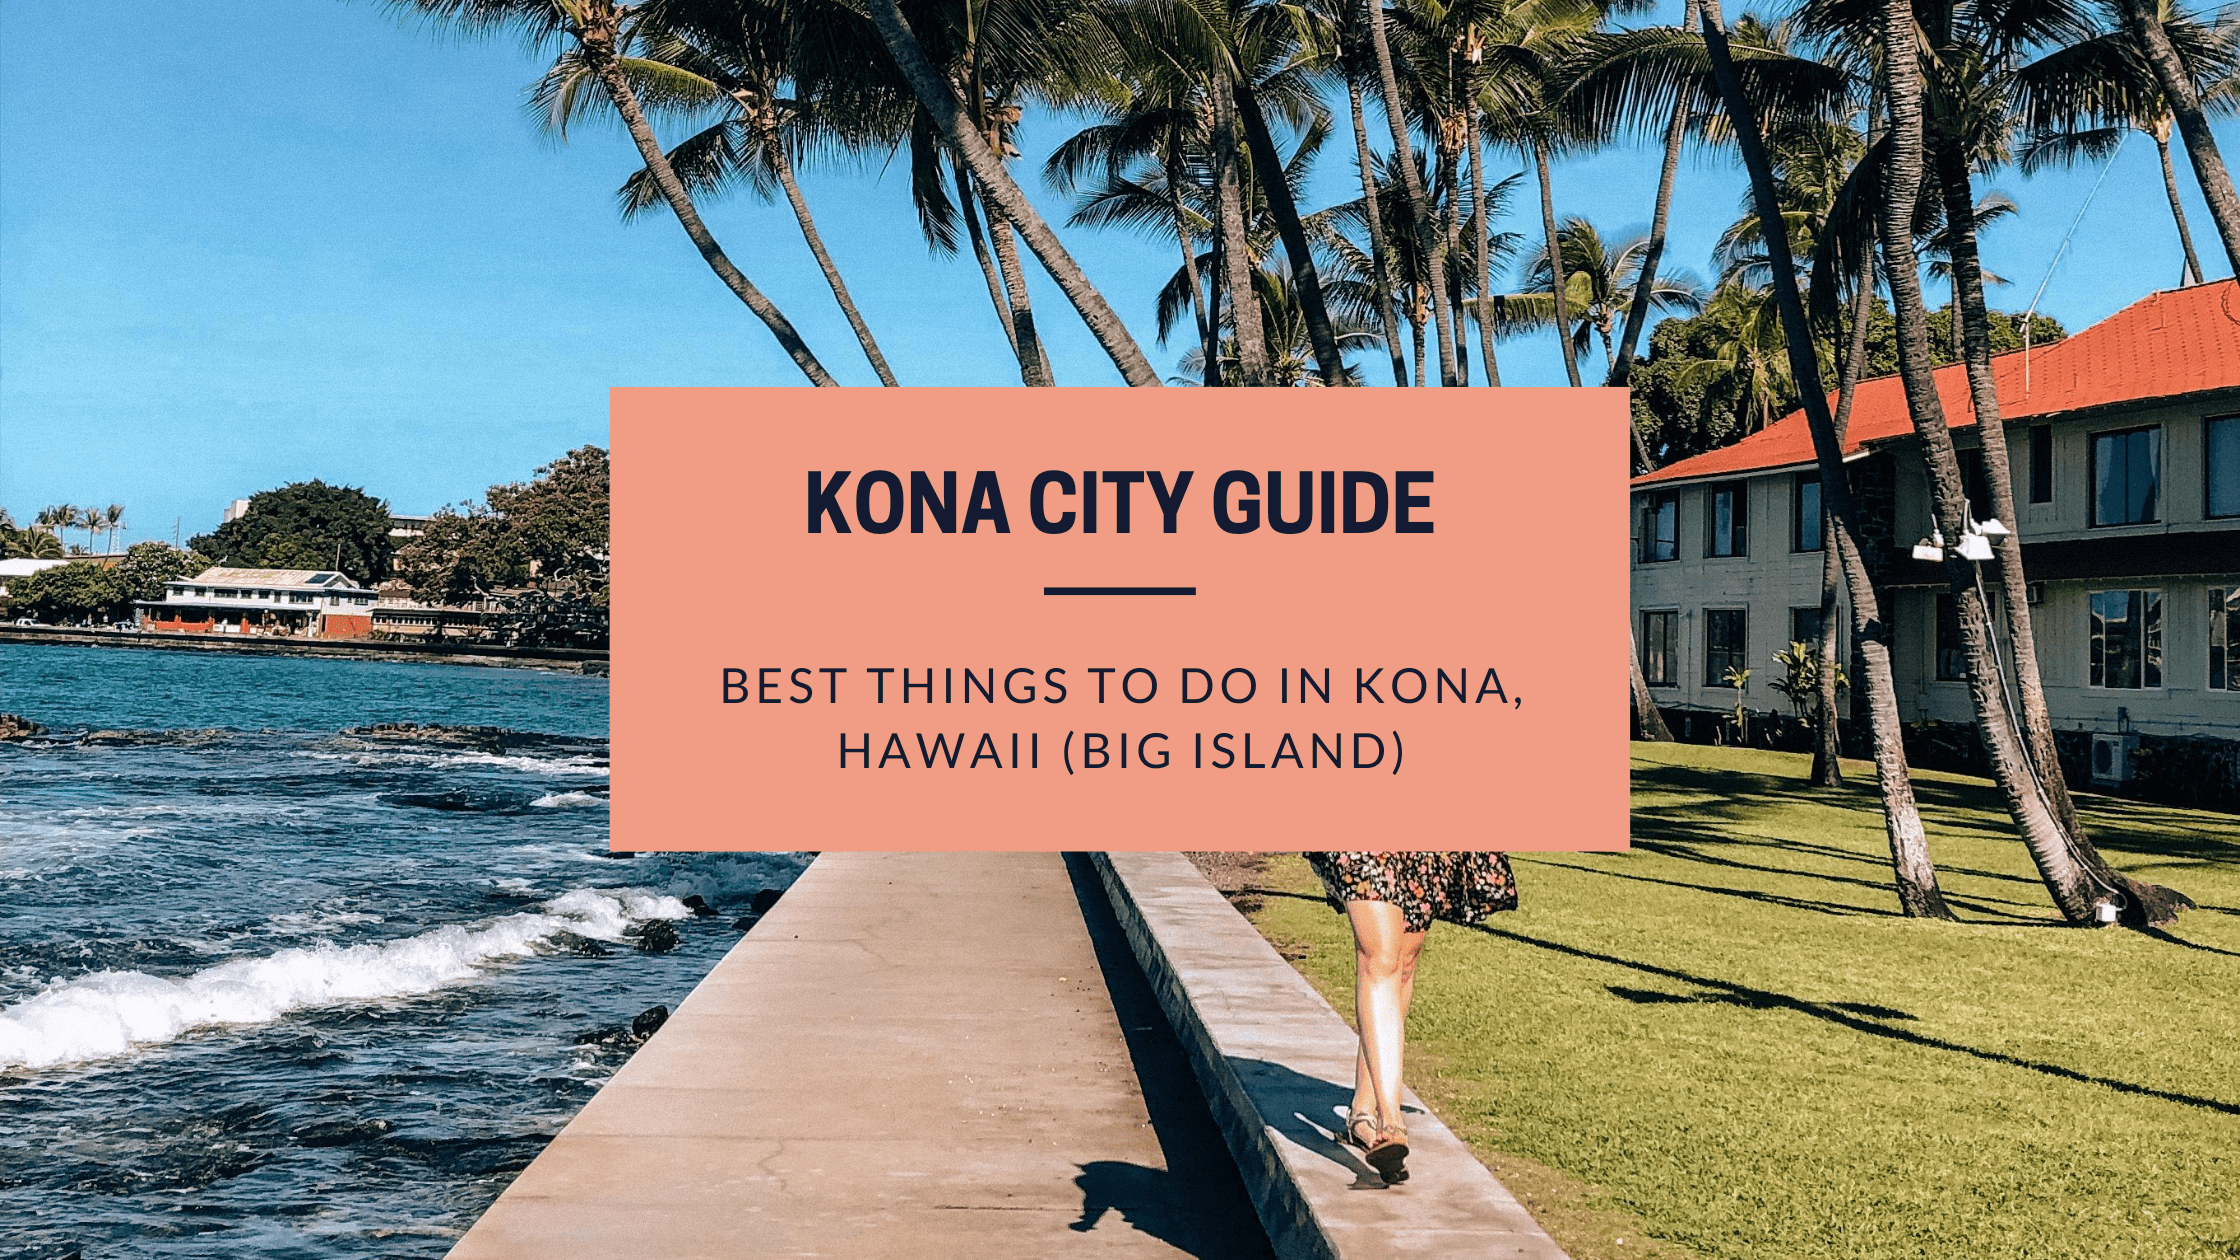 Kona City Guide Top 10 Best Things To Do in Kona on the Big Island of